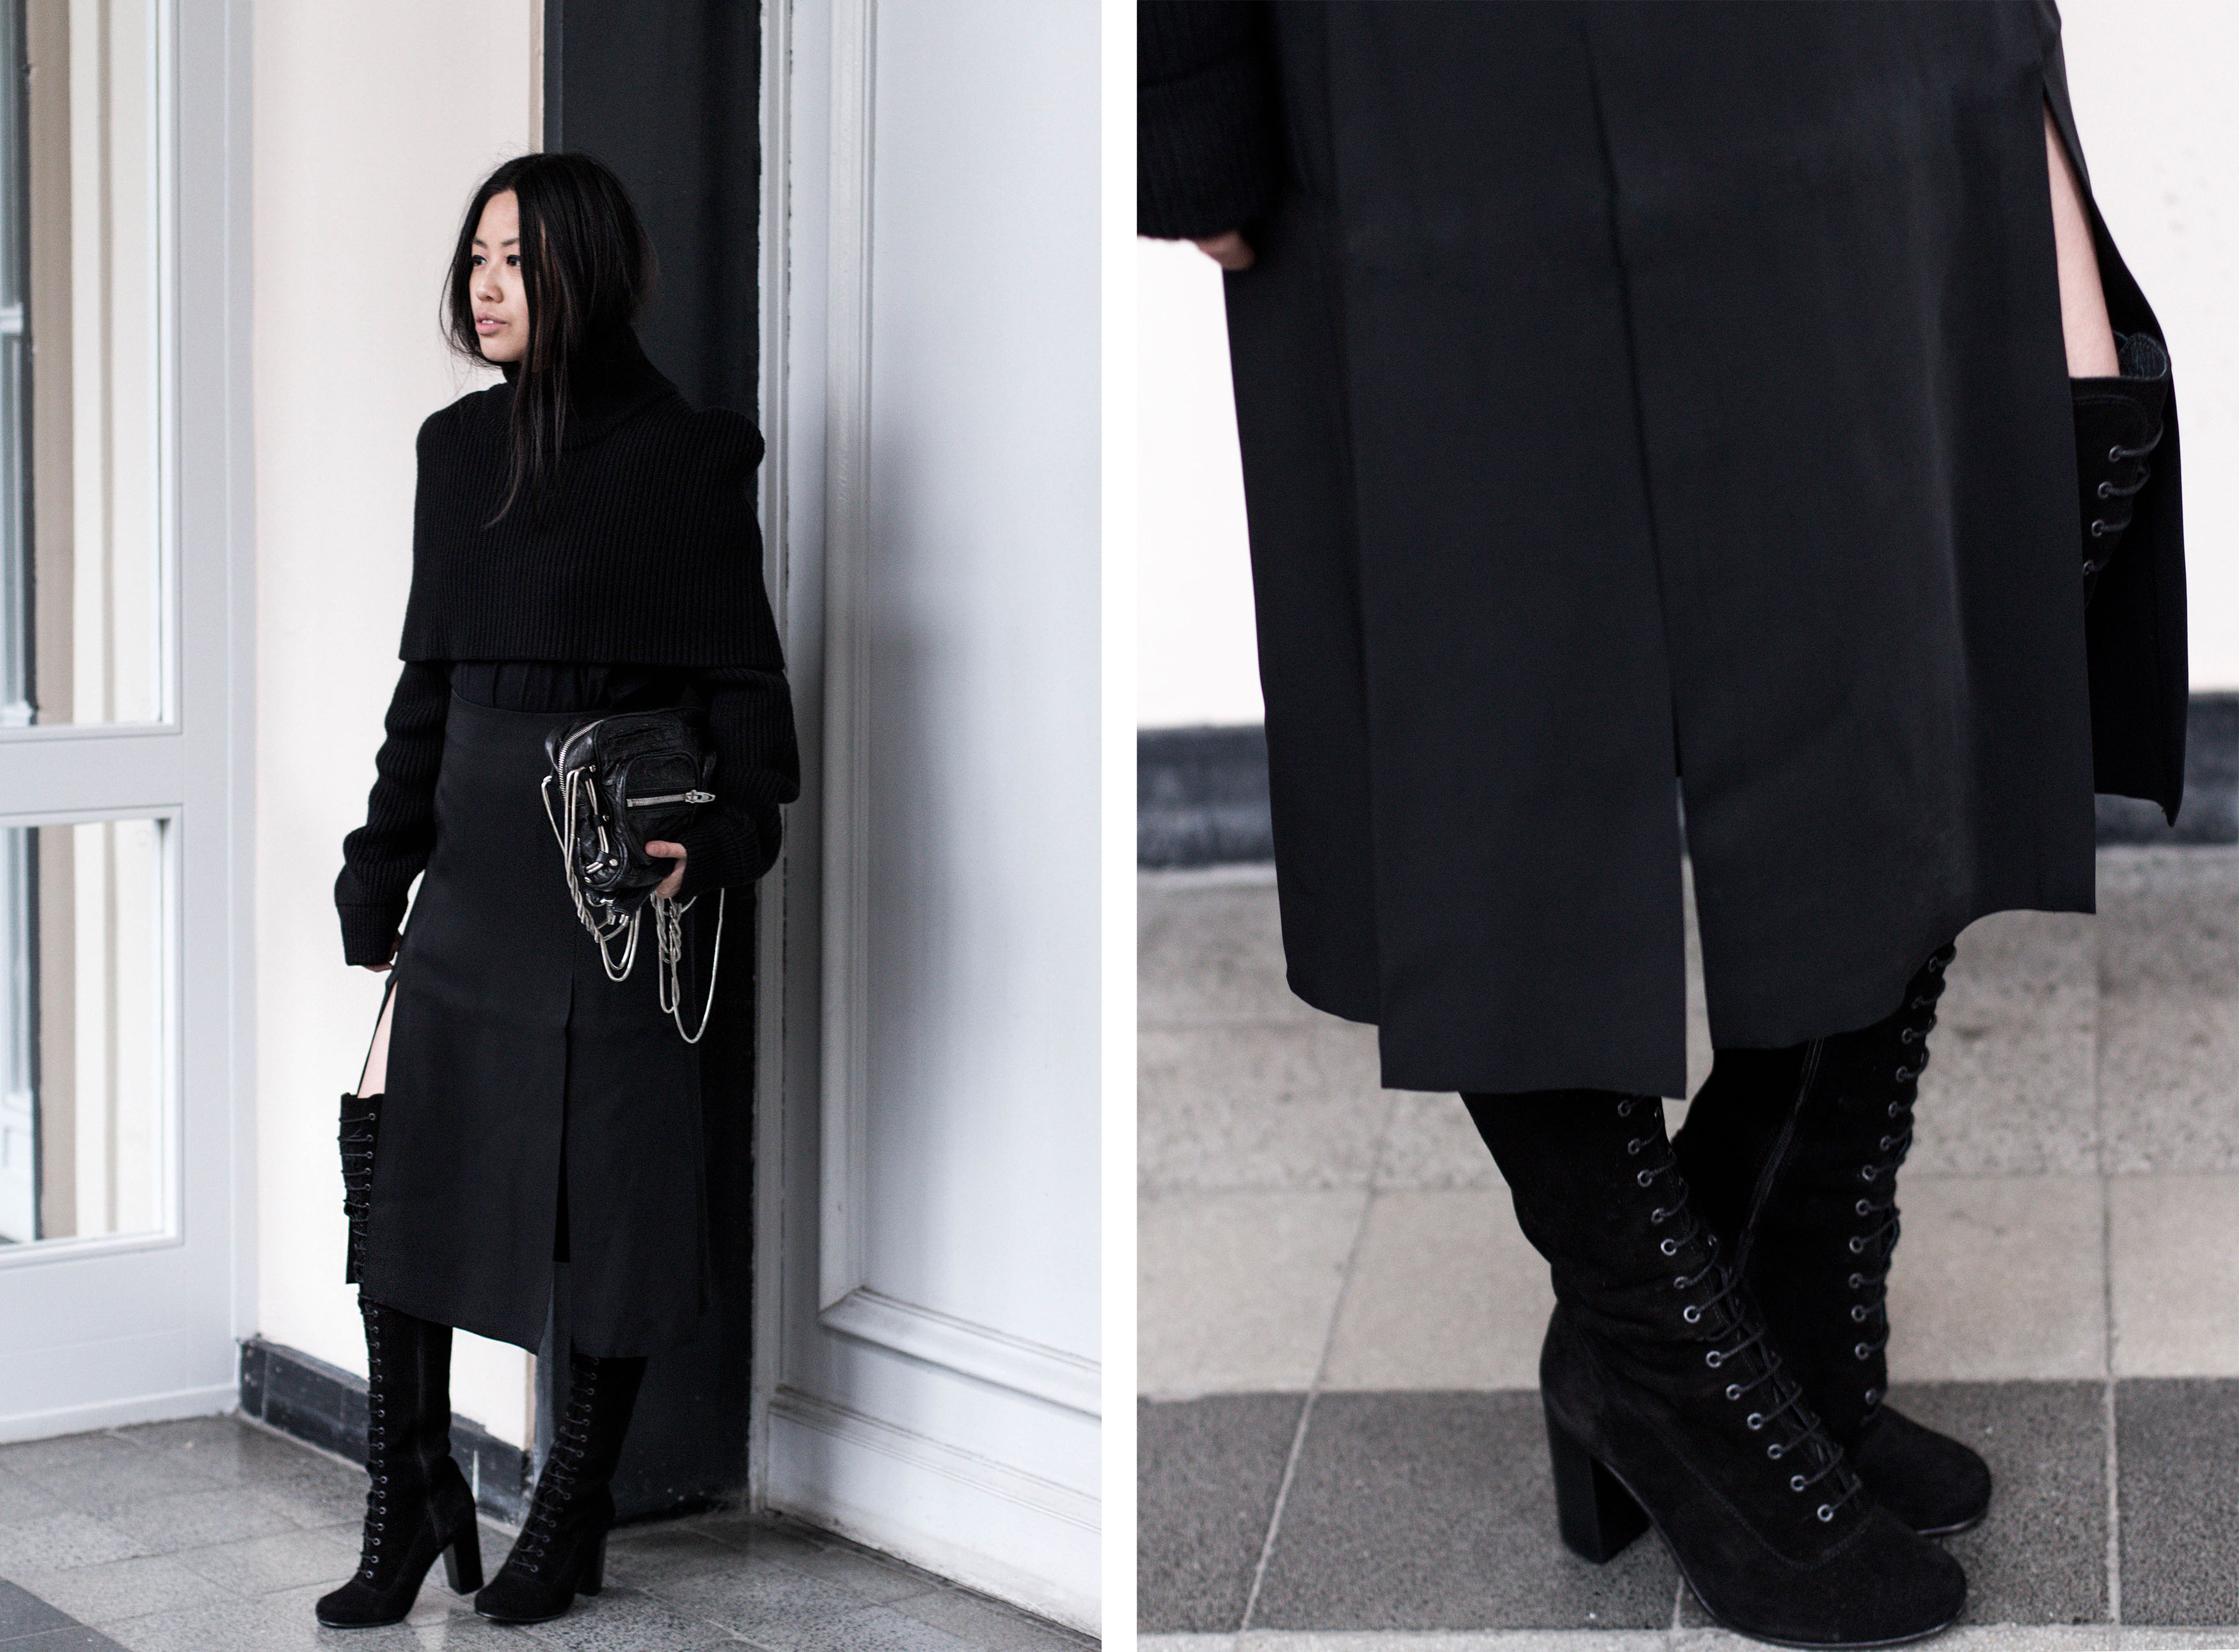 IHEARTALICE.DE – German Fashion & Lifestyle-Blog by Alice M. Huynh: All-Black-Everything Look with Ted&Muffy Lace-up Overknees, Maison Martin Margiela Knitwear Turtleneck, Alexander wang Brenda Leather Bag, &OtherStories Slit Skirt